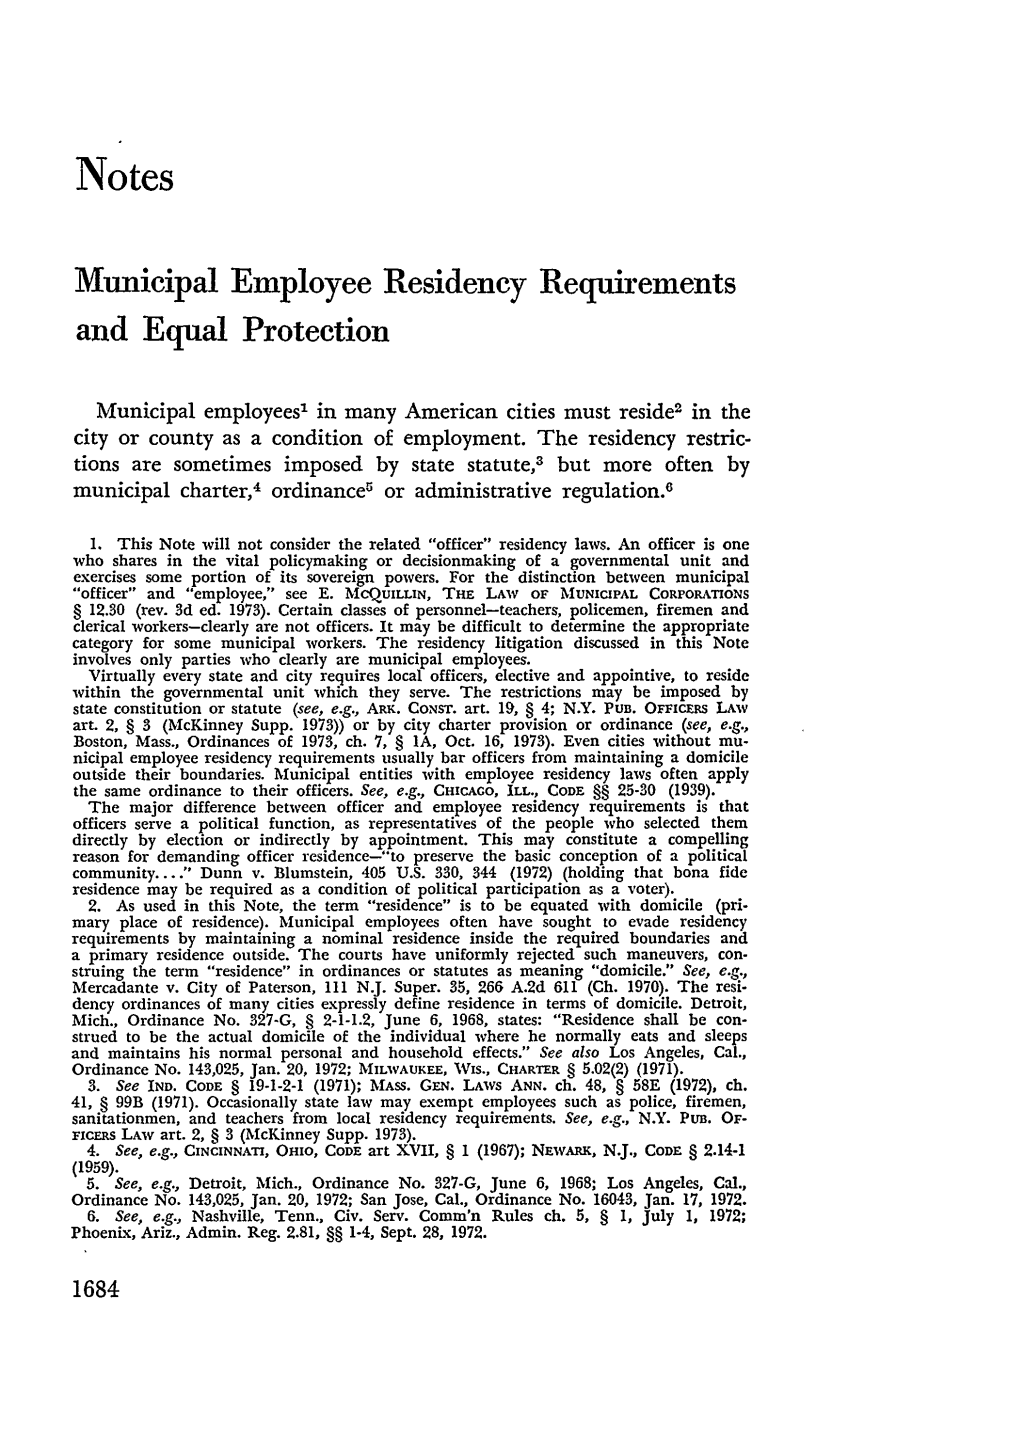 Municipal Employee Residency Requirements and Equal Protection